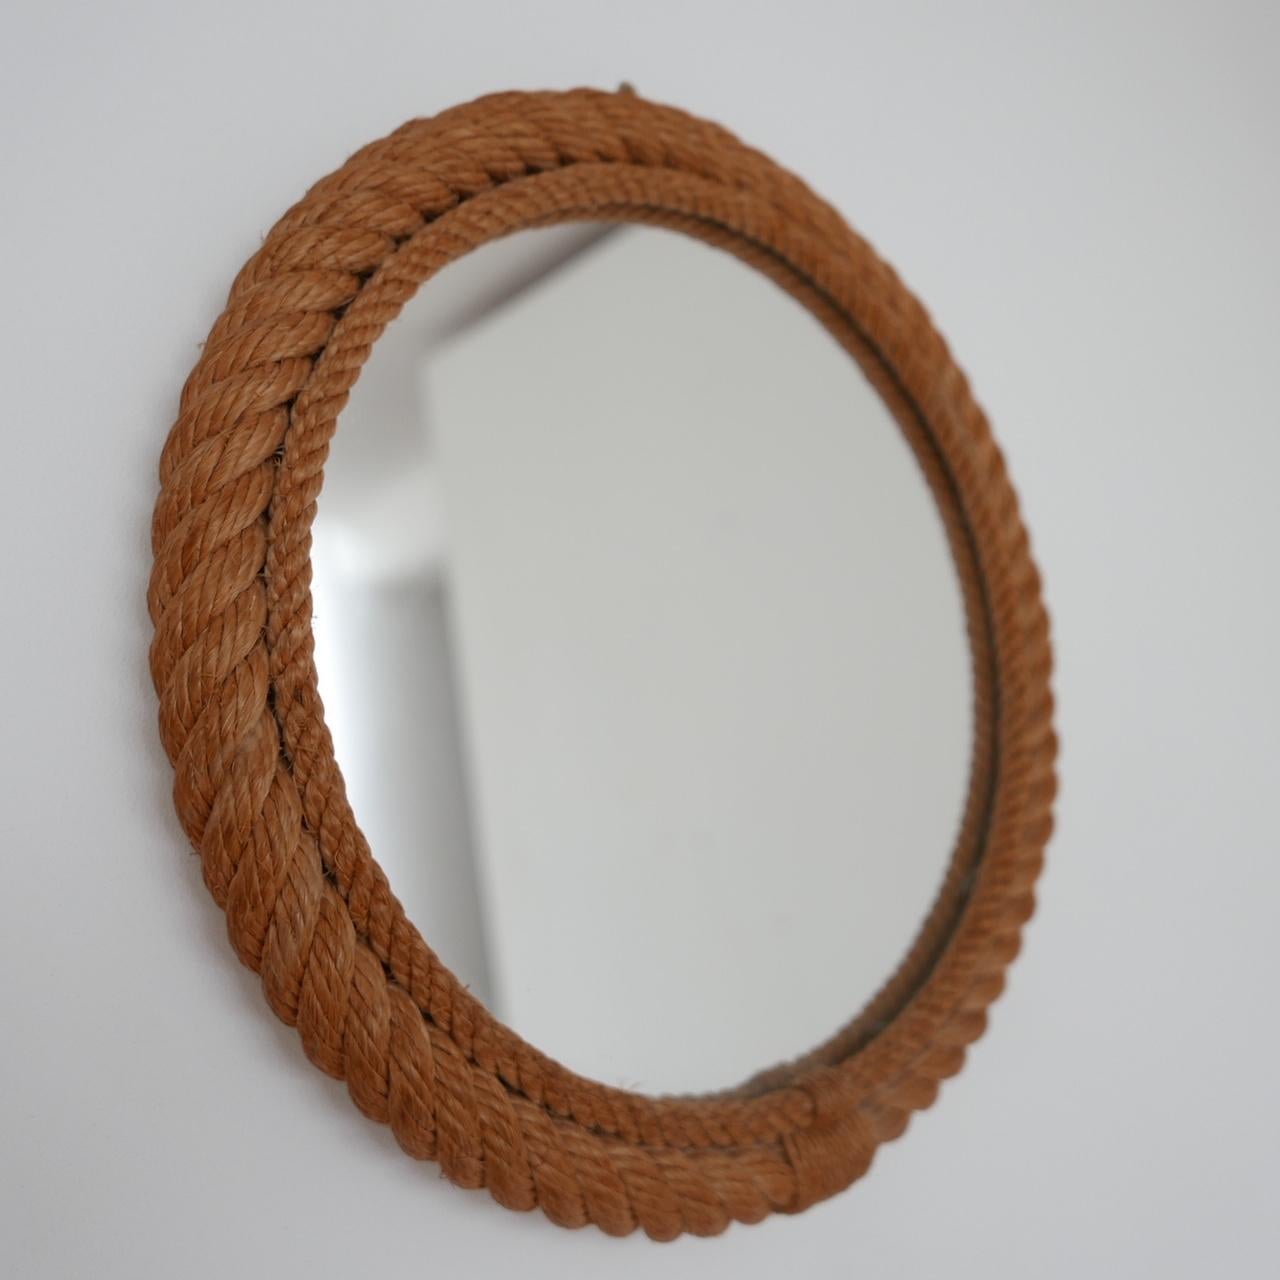 A ropecord mirror attributed to Audoux-Minet,

France, c1960s. 

A mid to smaller sized model. 

Condition: generally good condition with some scuffs and marks commensurate with age. 

Dimensions: 30 diameter x 3 depth in cm. 

Delivery: POA.

 